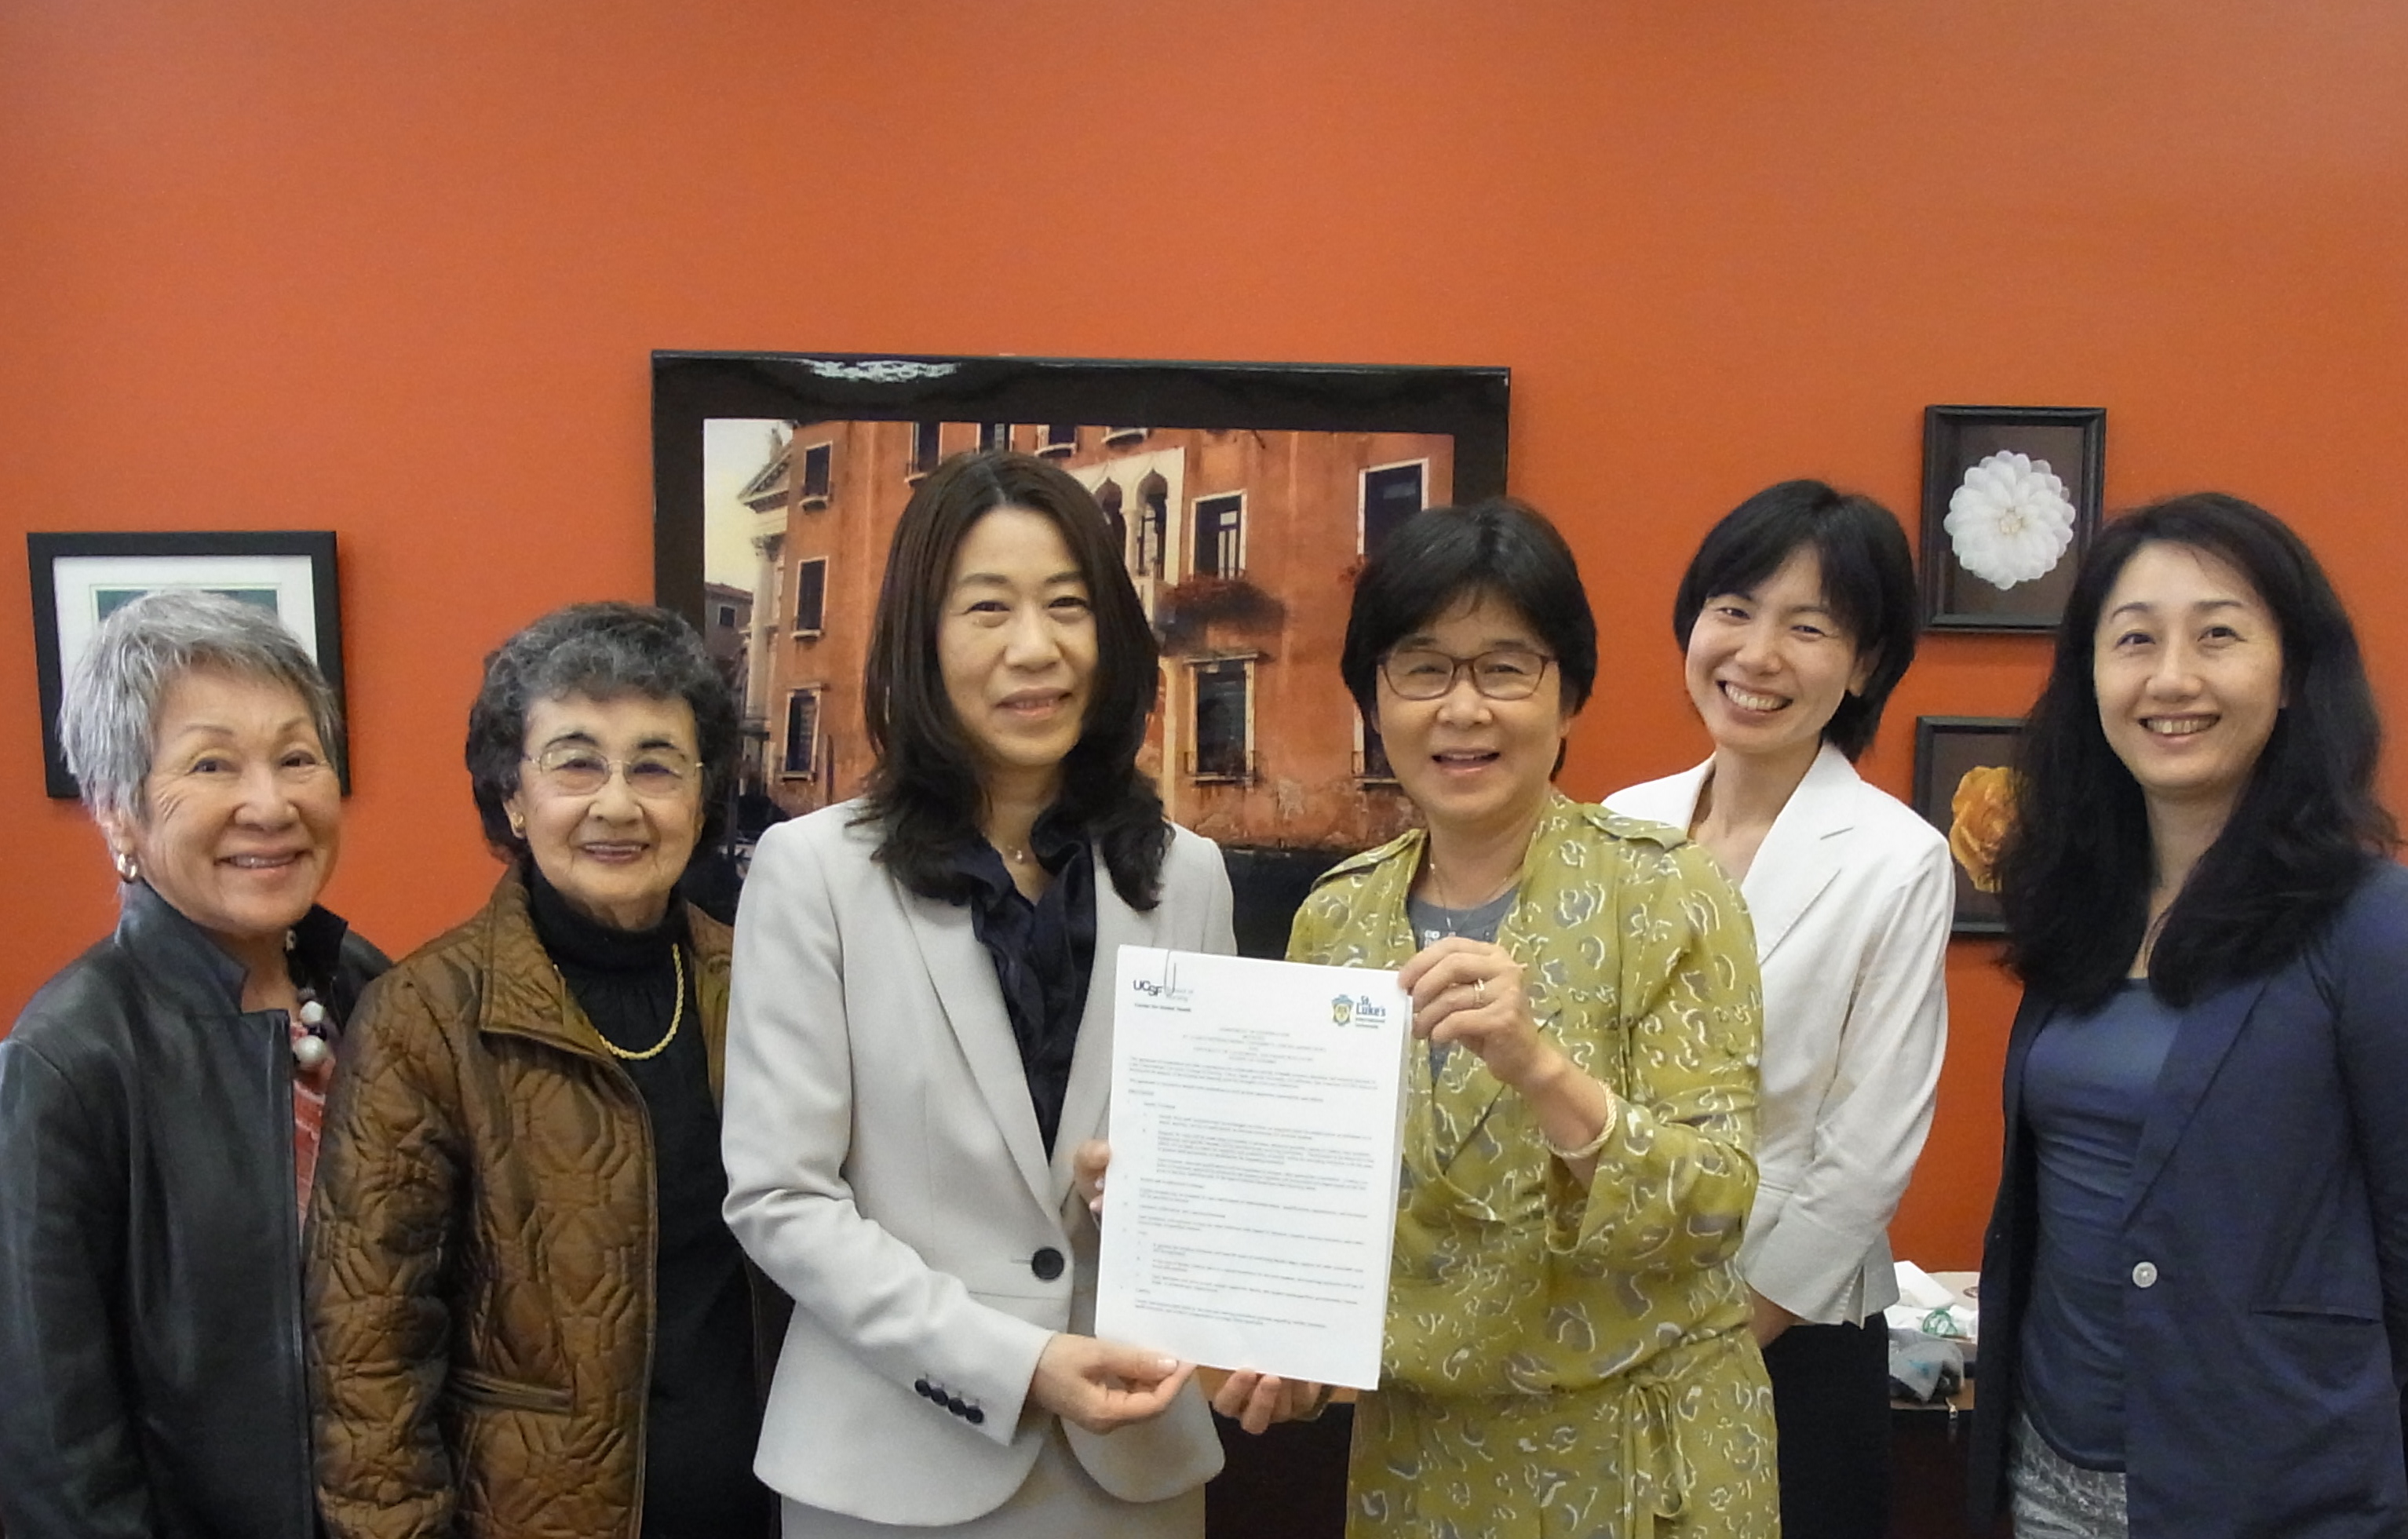 Professor Emeriti Furuta and Oda, Dr. Hong, and delegation from Japan pose with the partnership agreement.